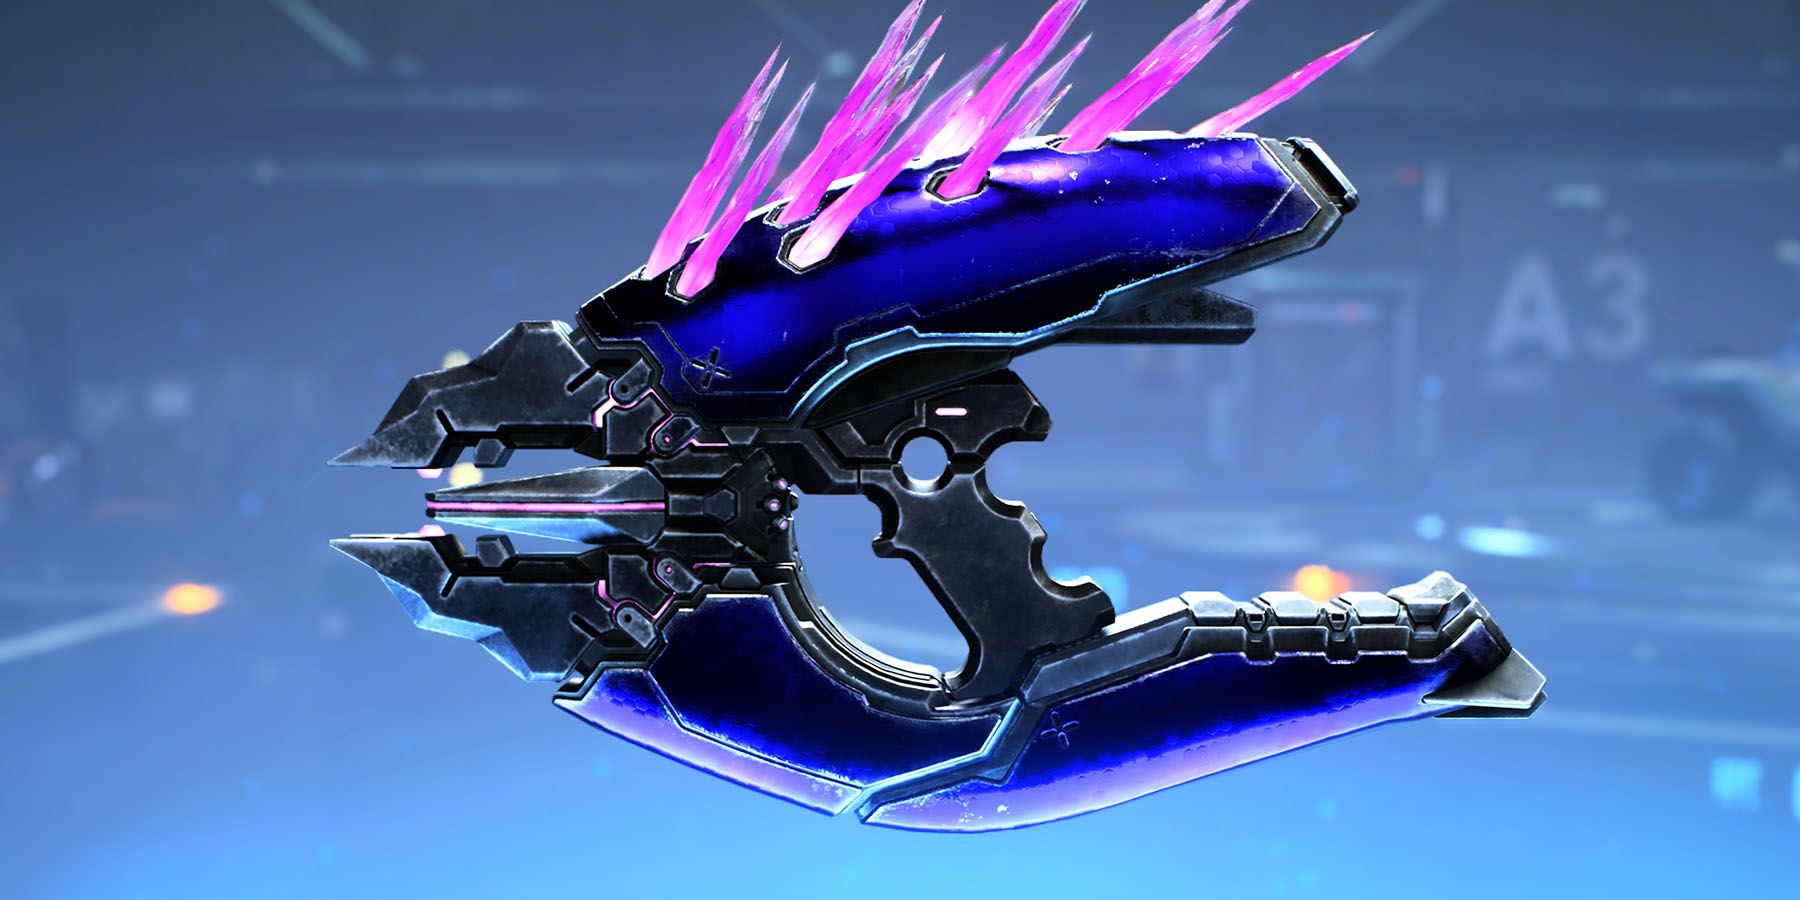 An image of the Covenant Needler in Halo Infinite.